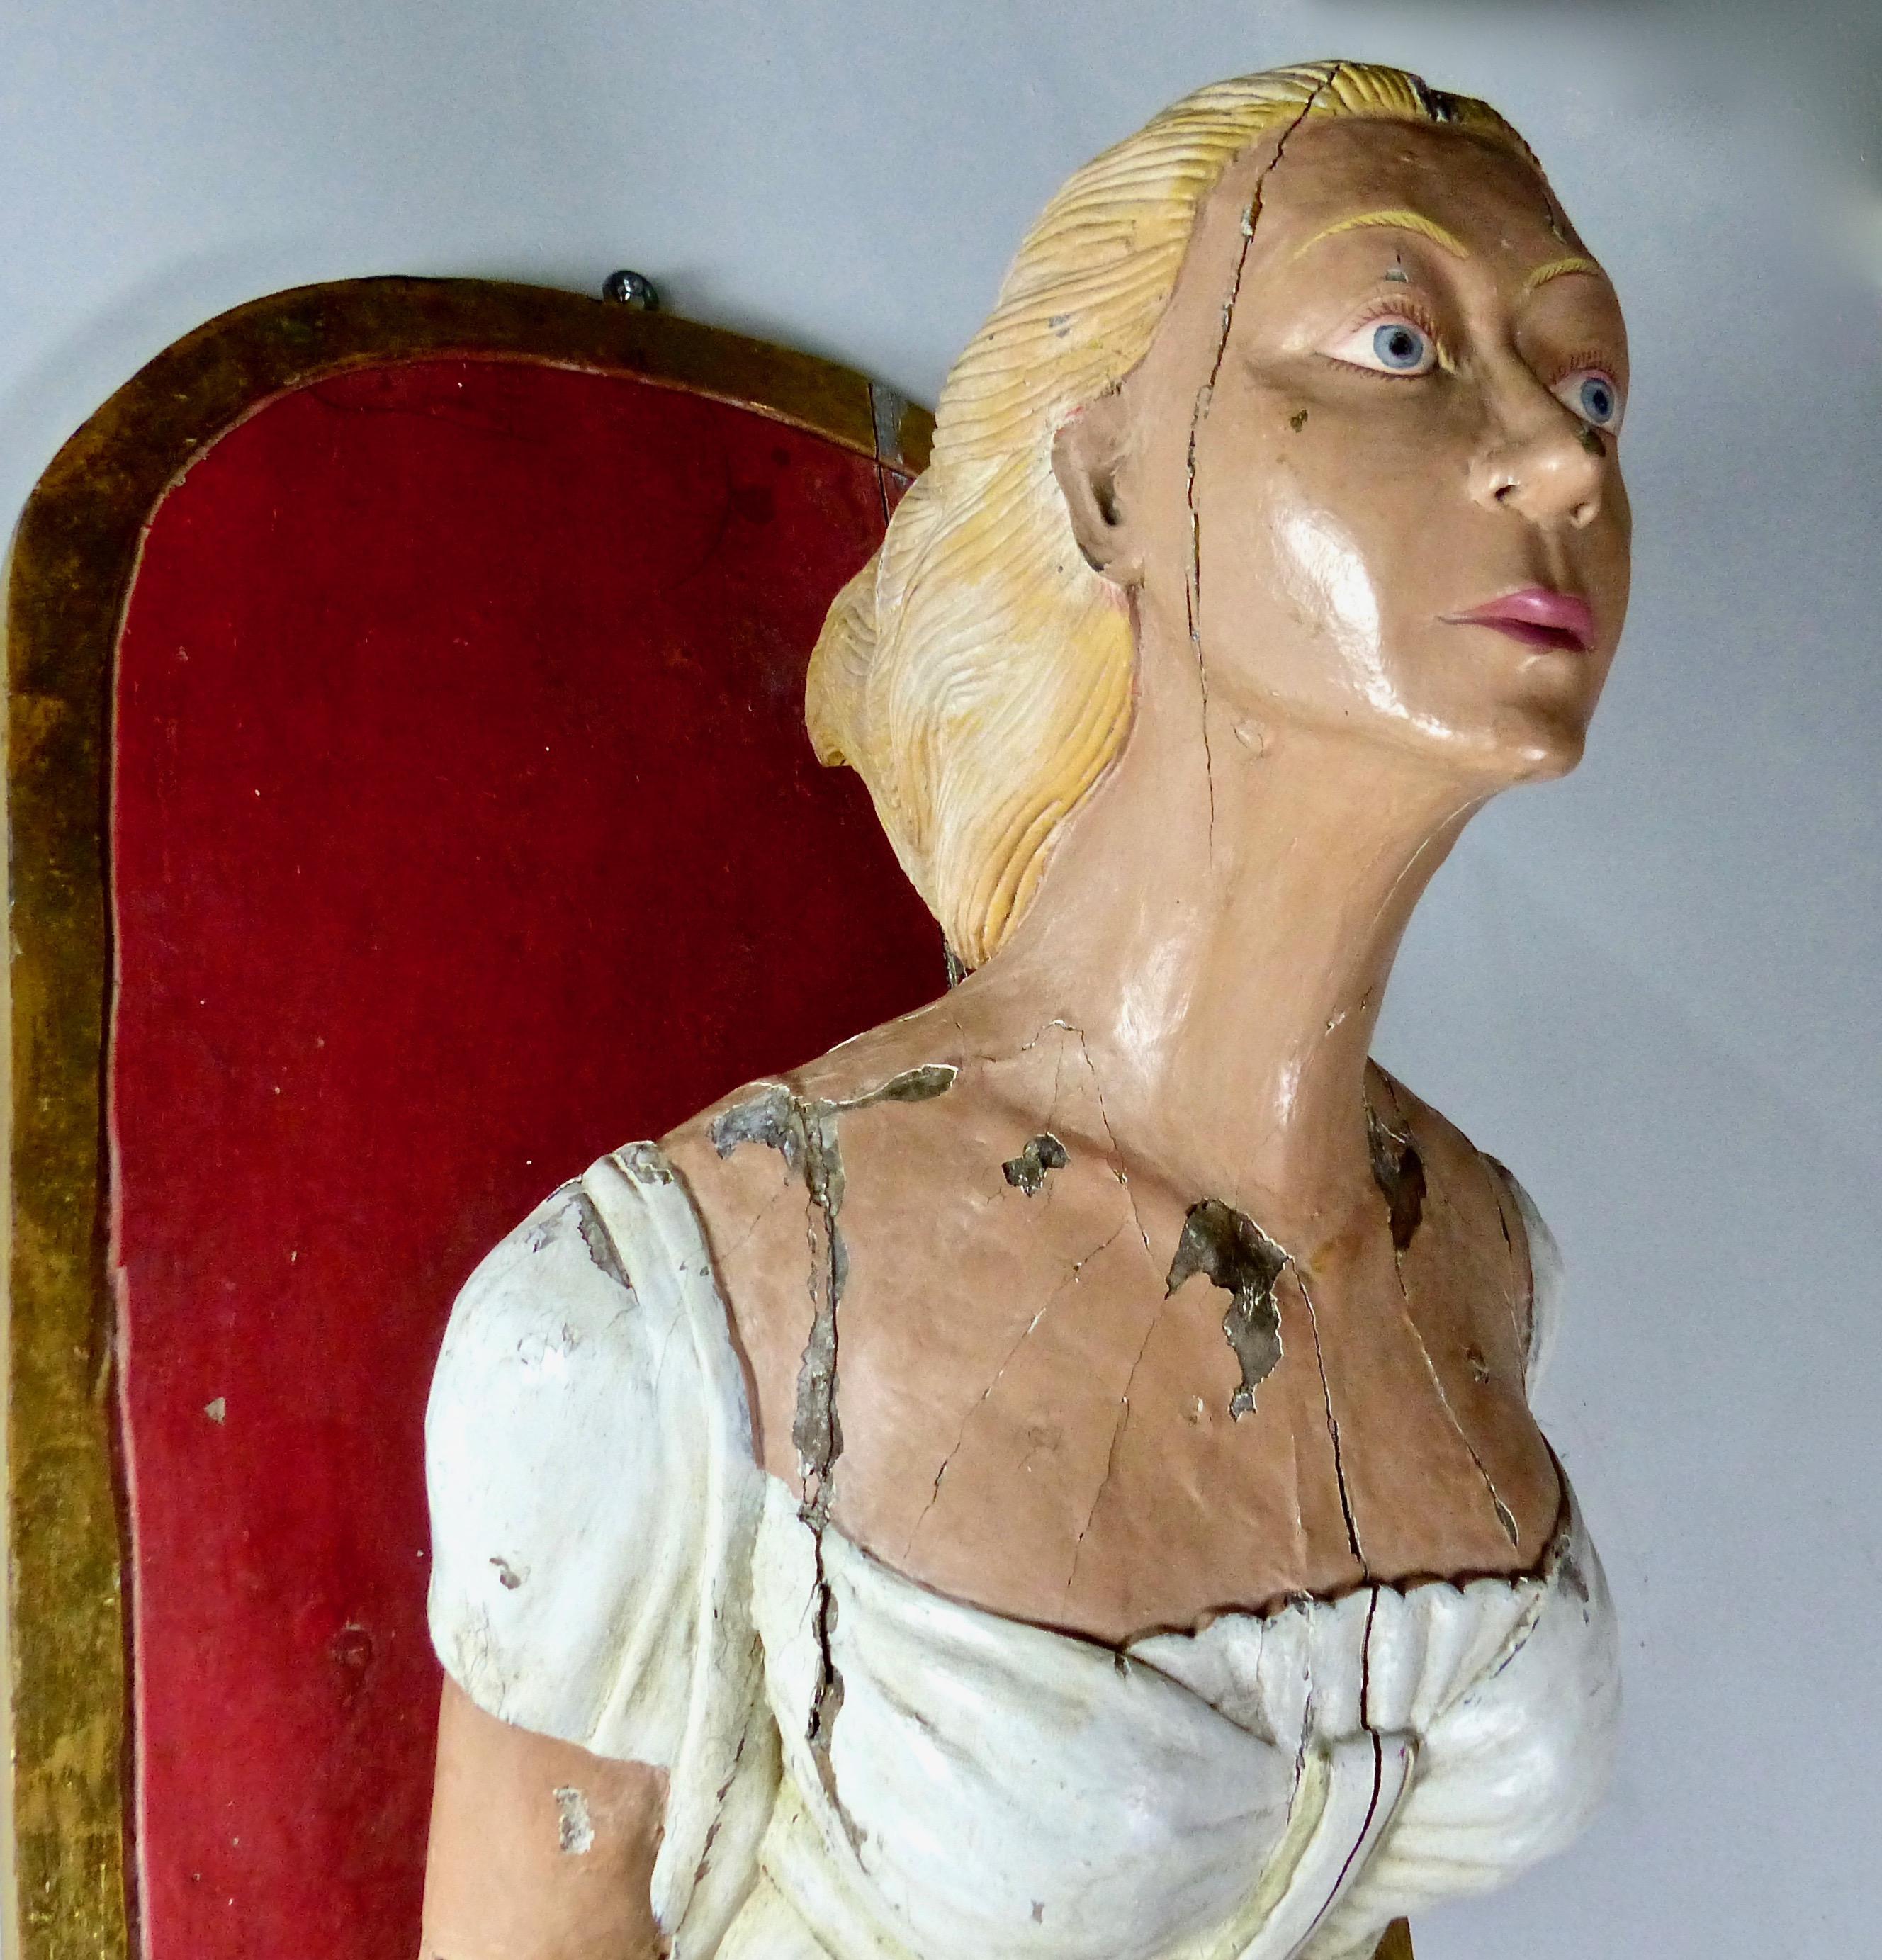 Canadian Early 20th Century Hand Carved Wooden Carnival/Circus Mermaid/Ship Figurehead